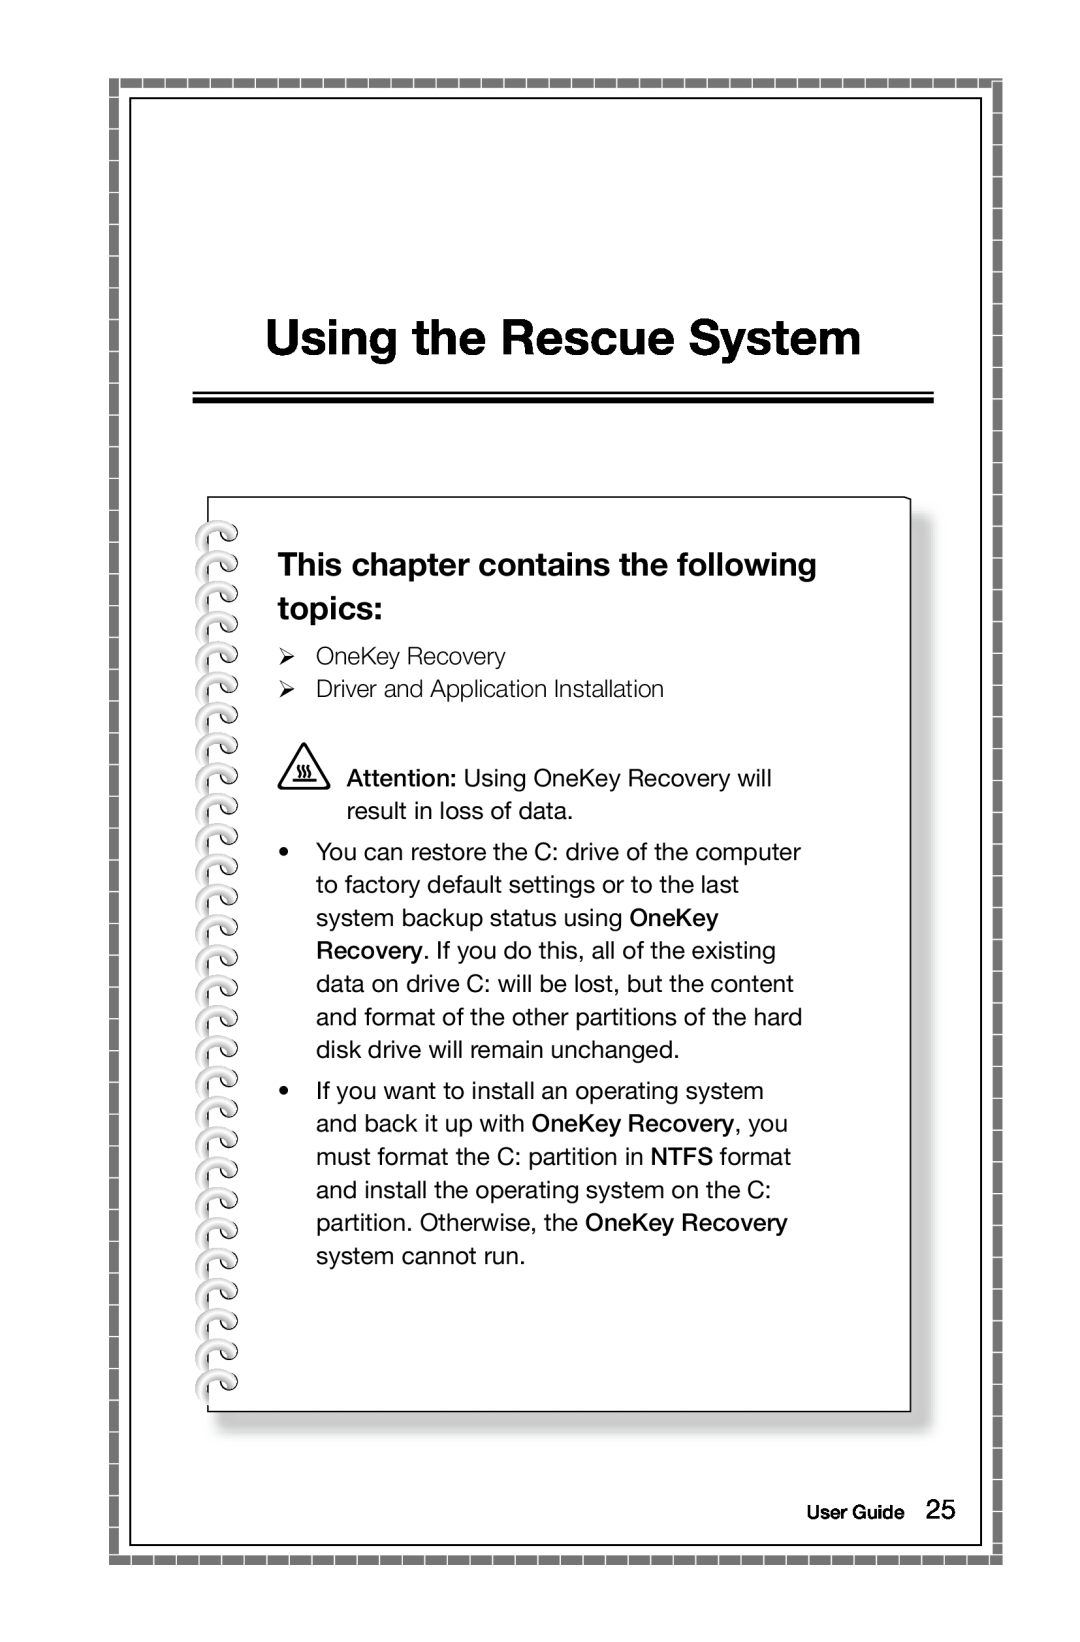 Lenovo A7 manual Using the Rescue System, This chapter contains the following topics 